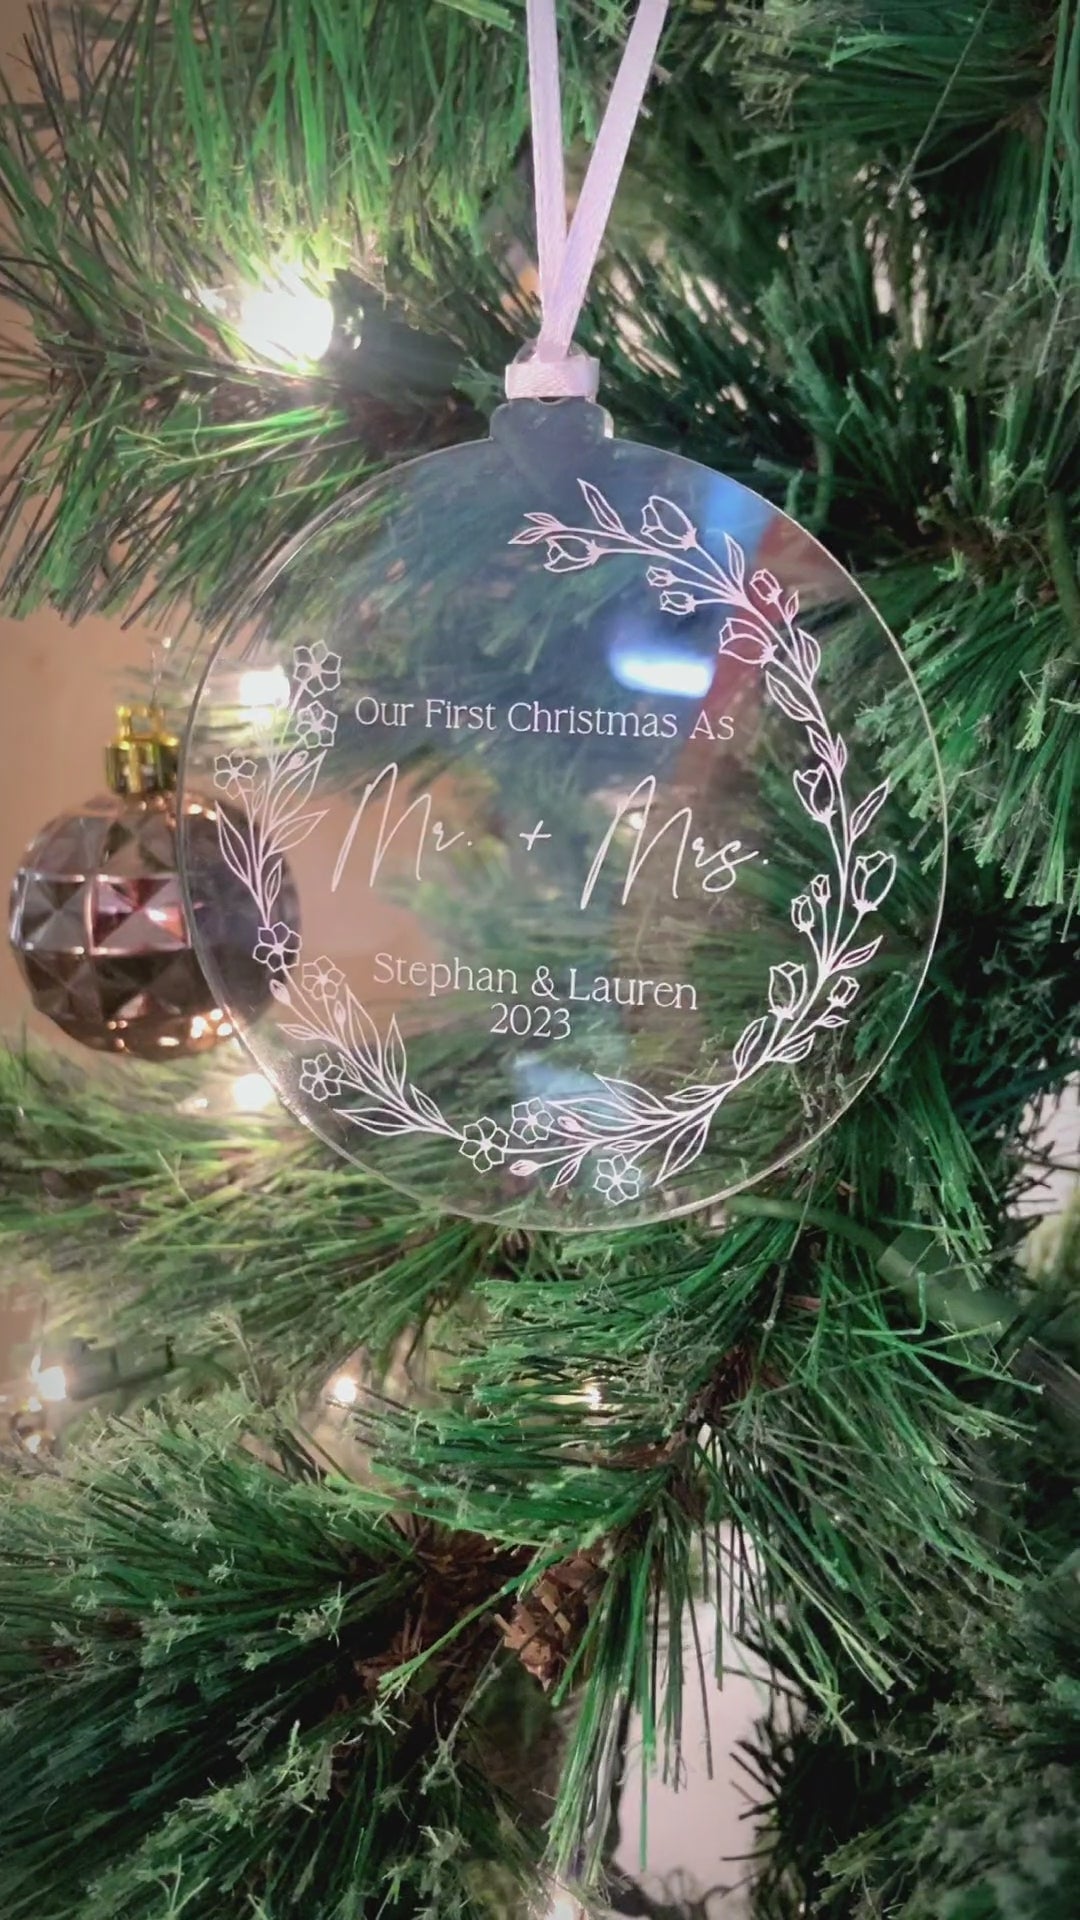 'Our First Christmas Married' Ornament